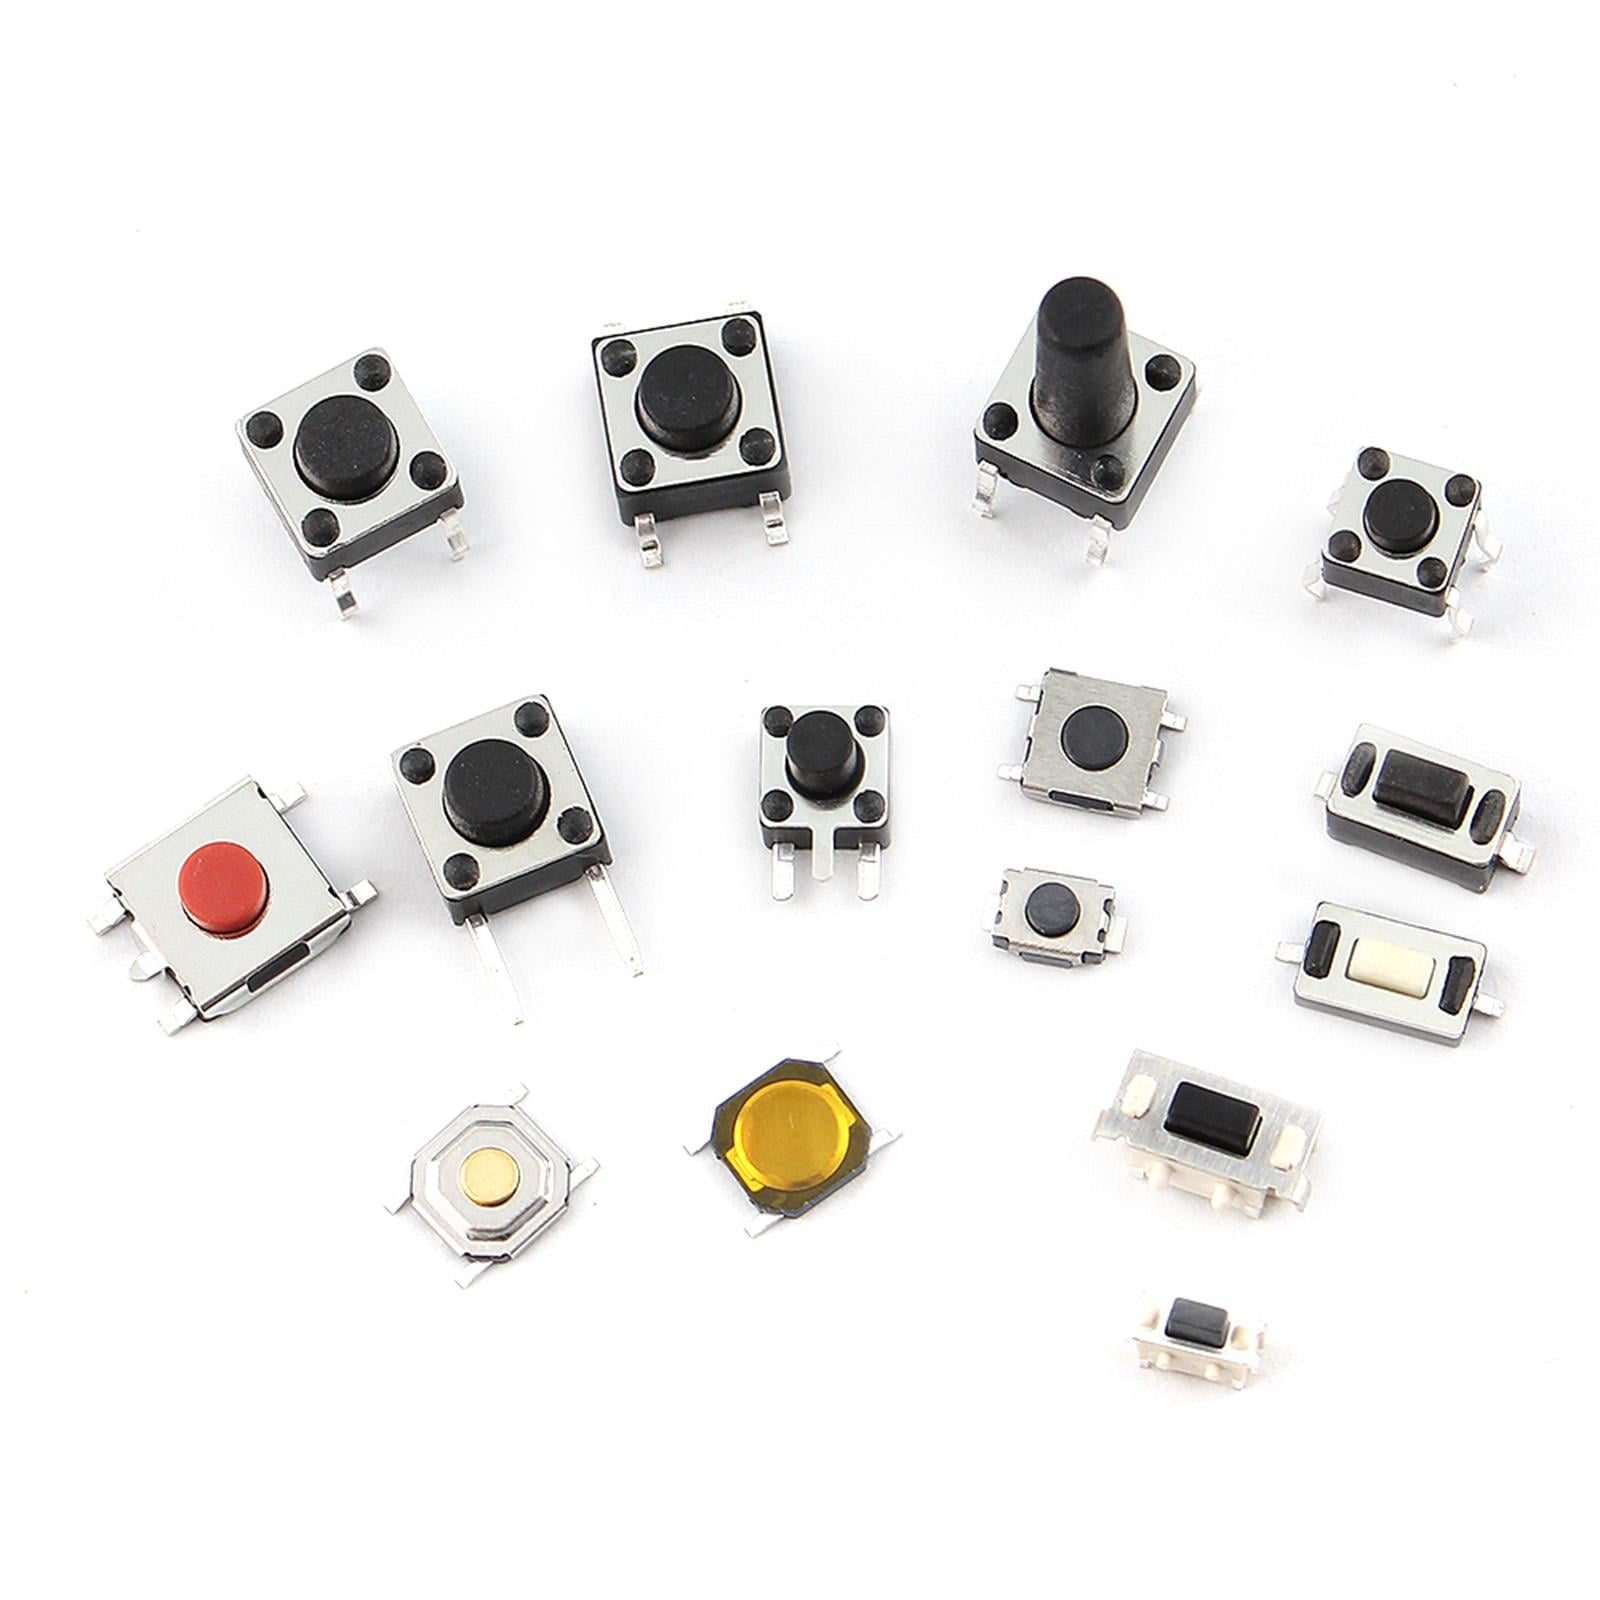 25 Types Micro Push Button Kit for Electronics Products Audio Equipment 